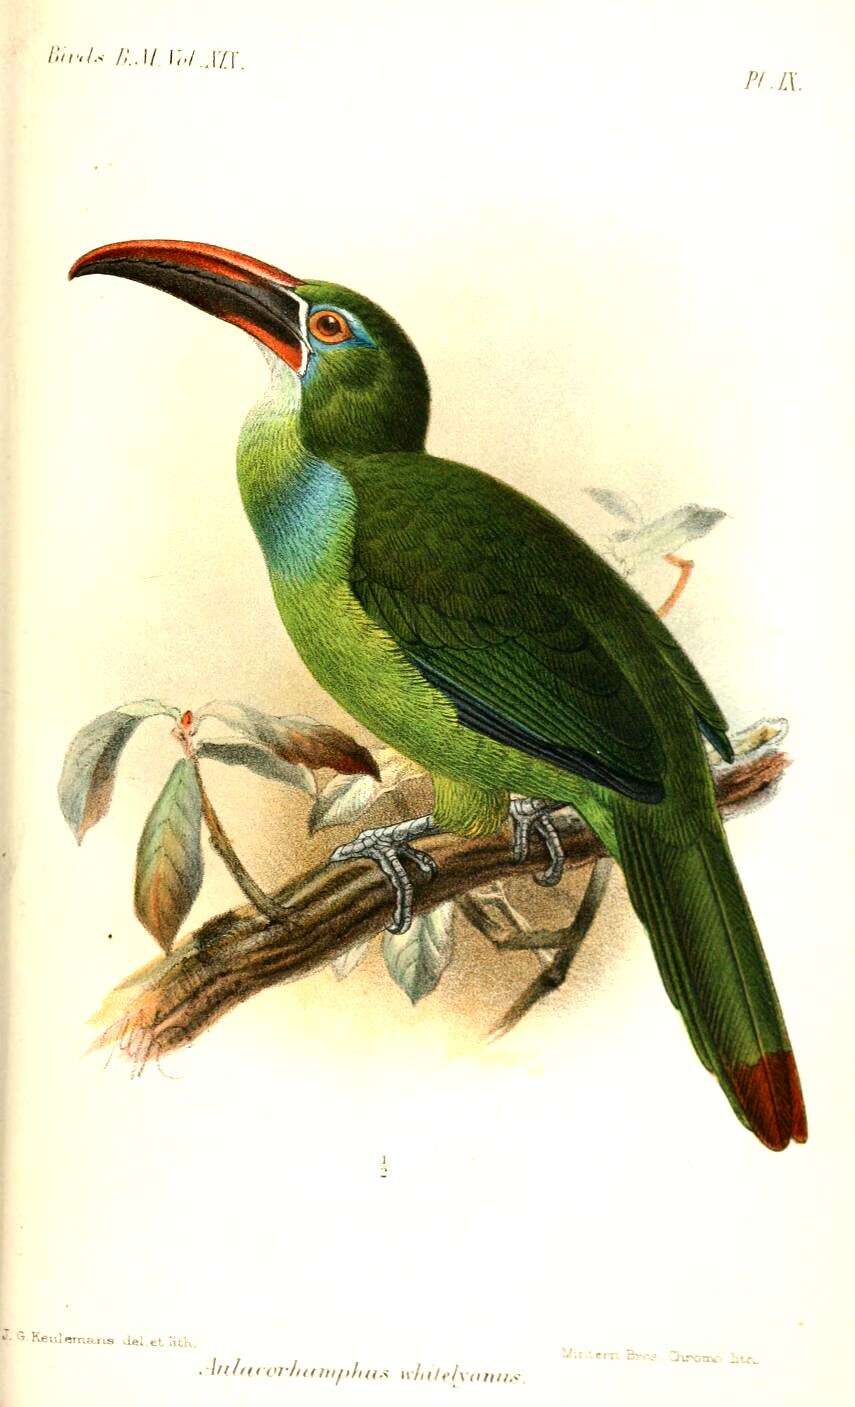 Image of toucans